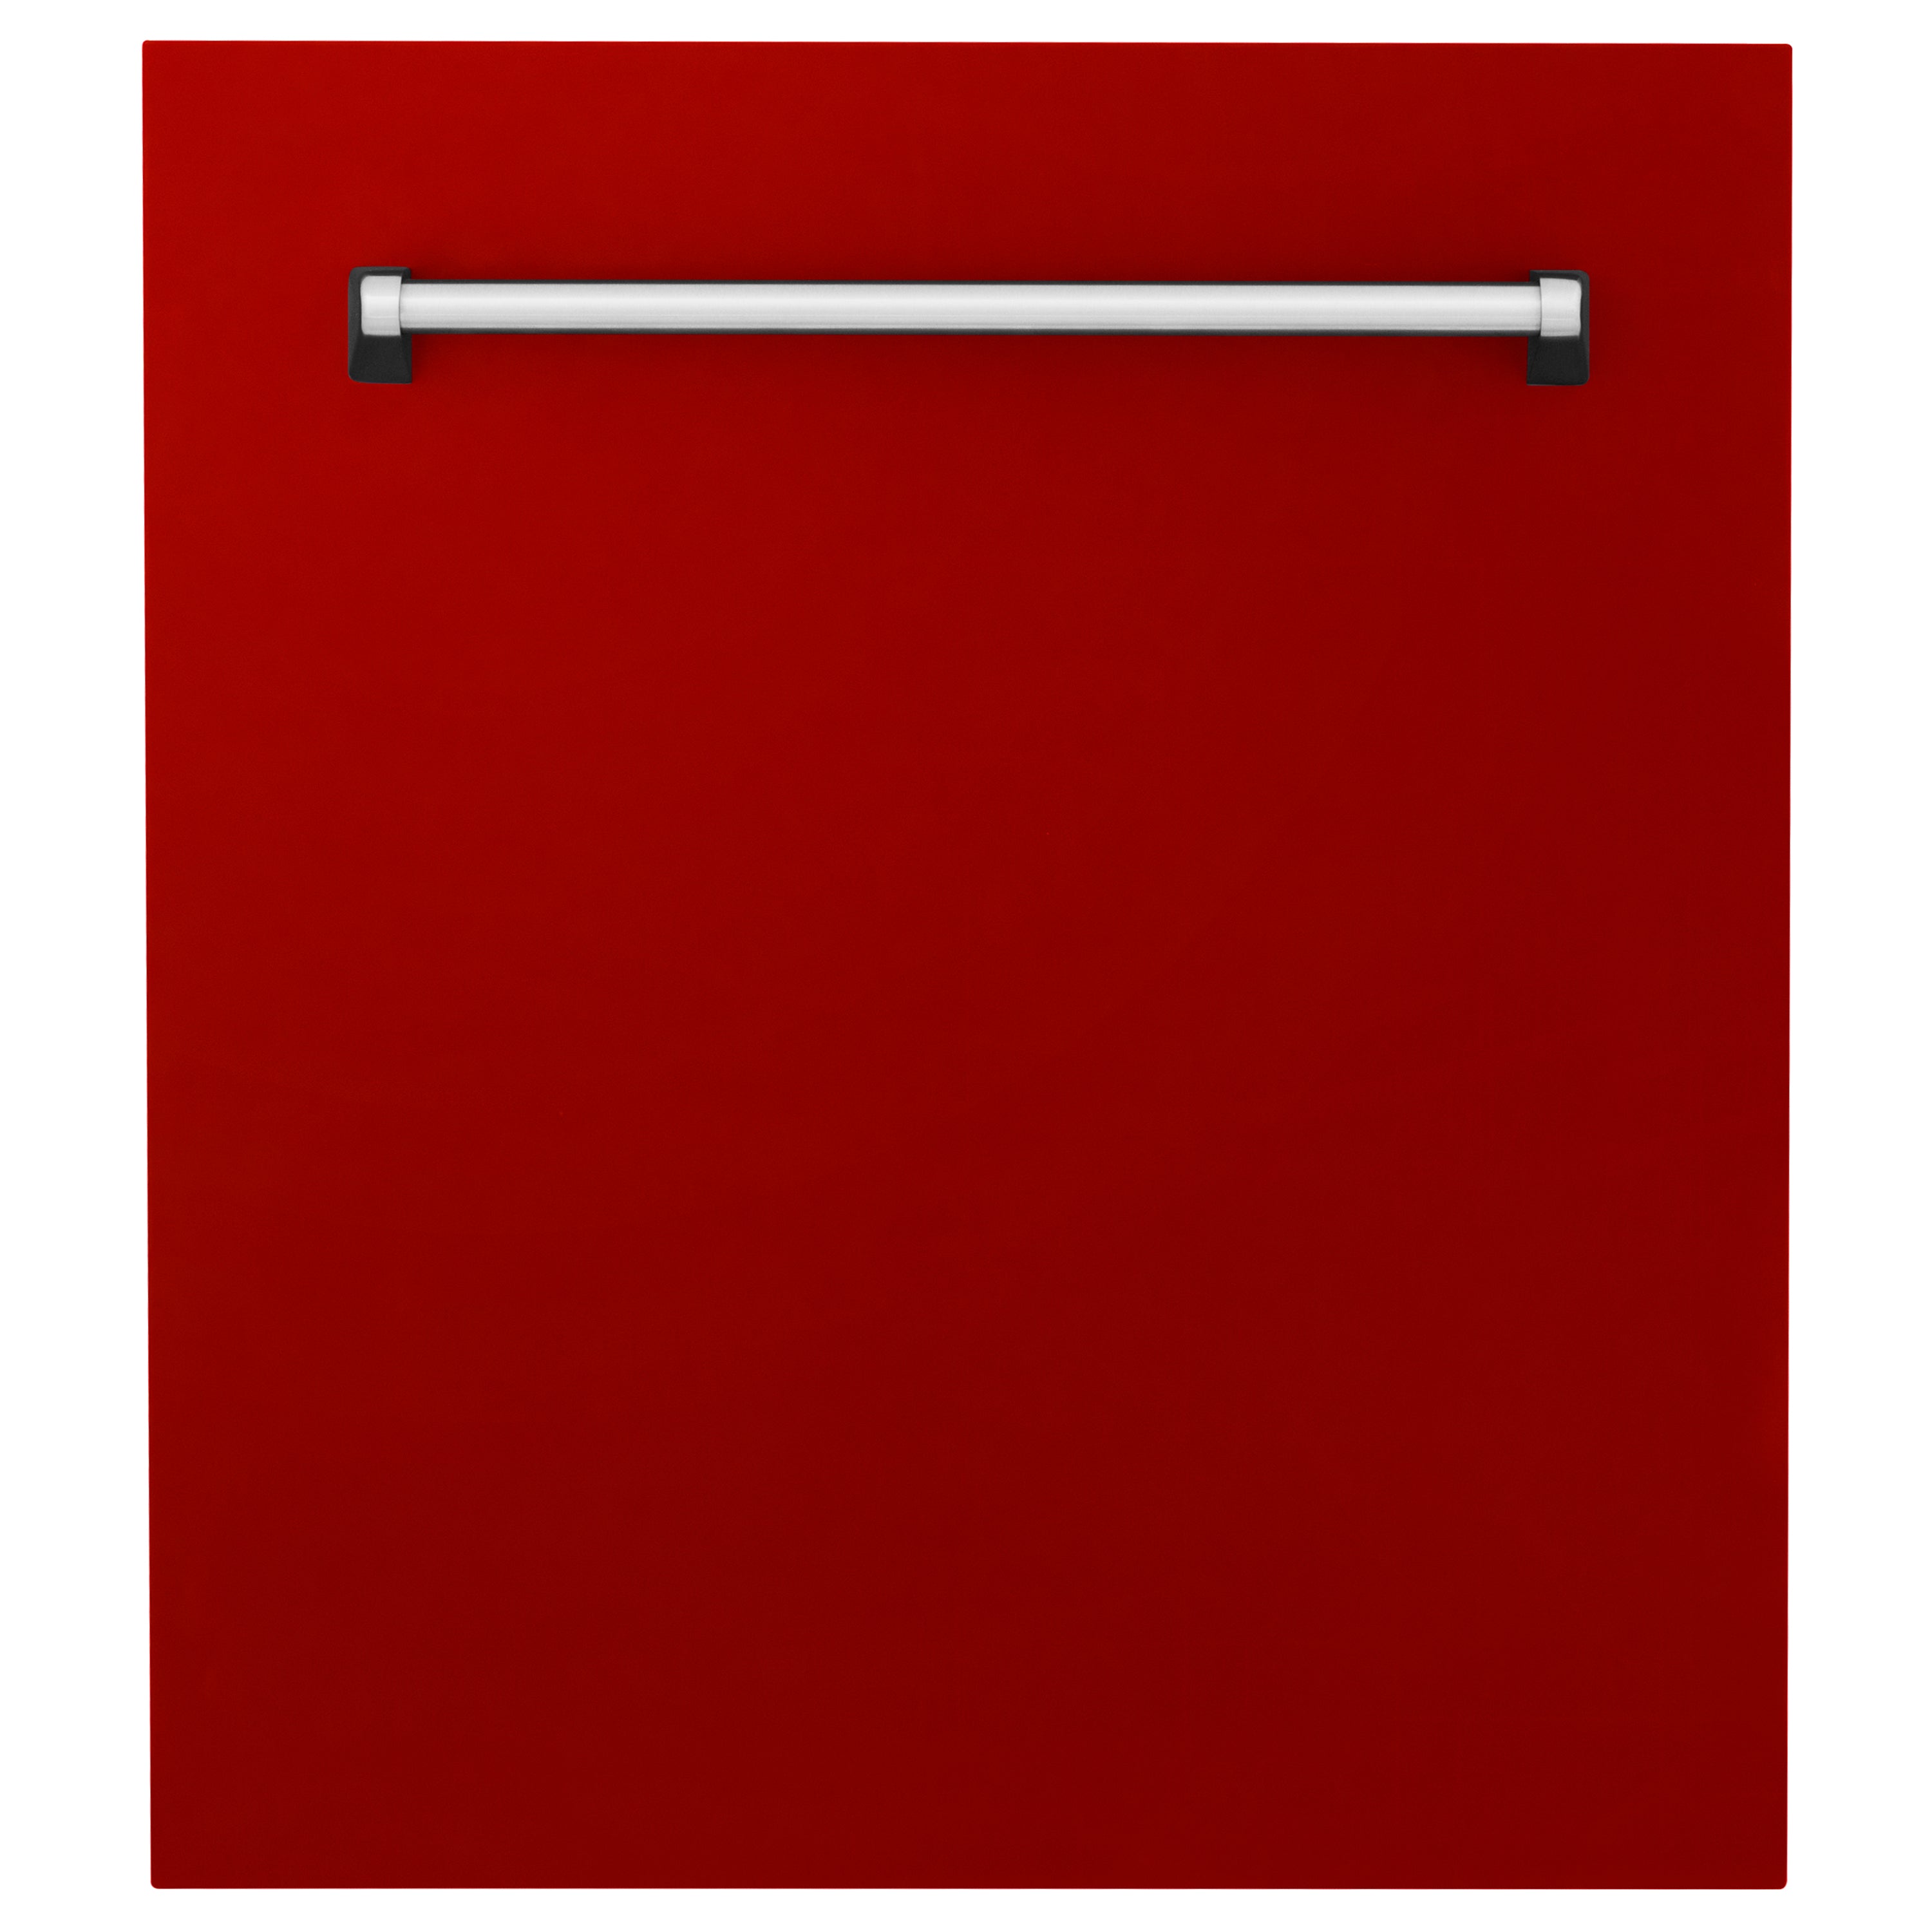 ZLINE 24" Tallac Dishwasher Panel in Red Gloss with Traditional Handle (DPV-RG-24)